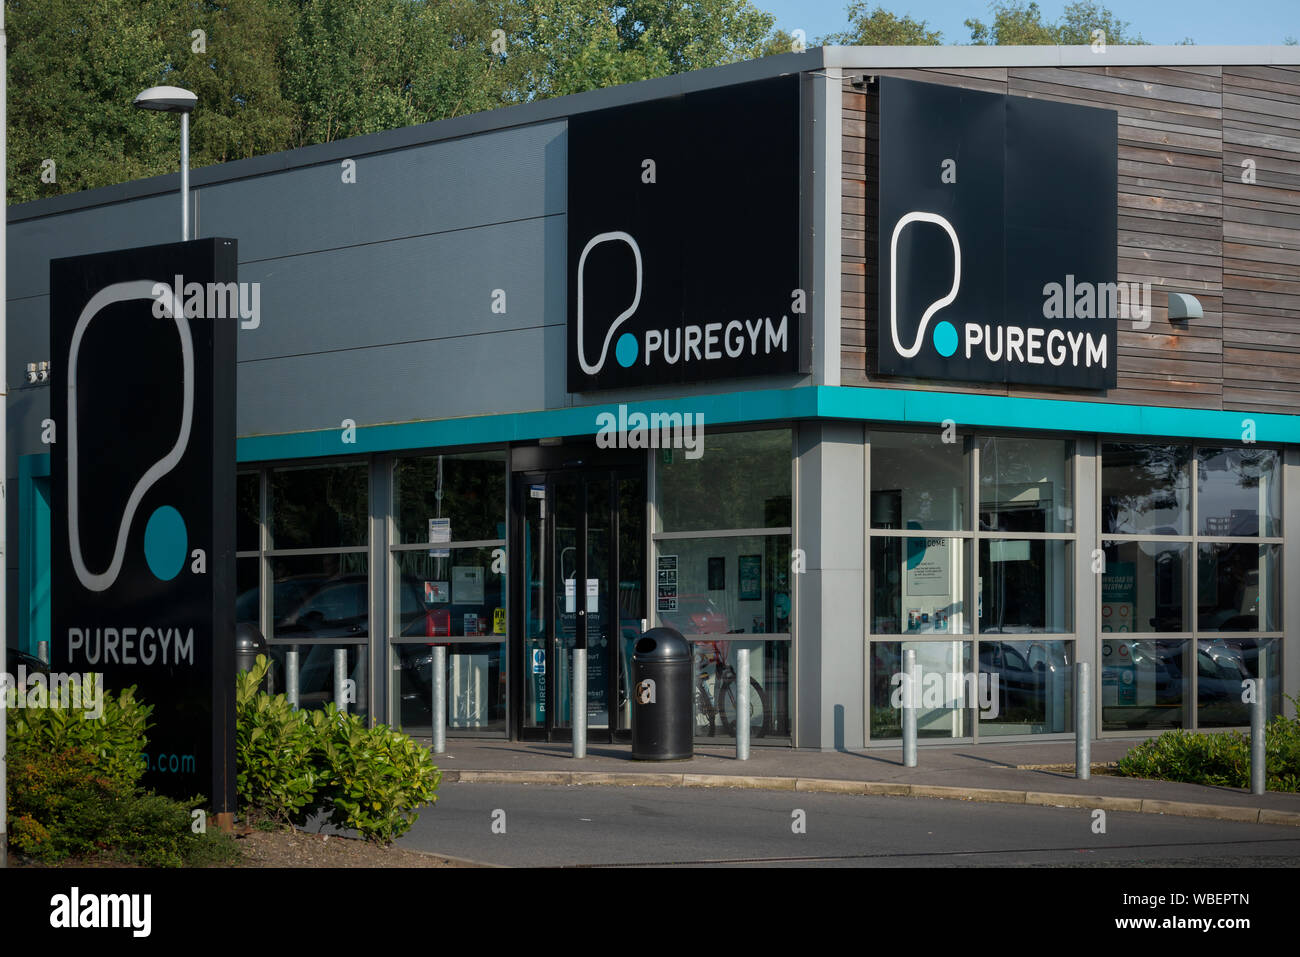 A branch of the PureGym health club located on Bury New Road in Manchester, UK. Stock Photo